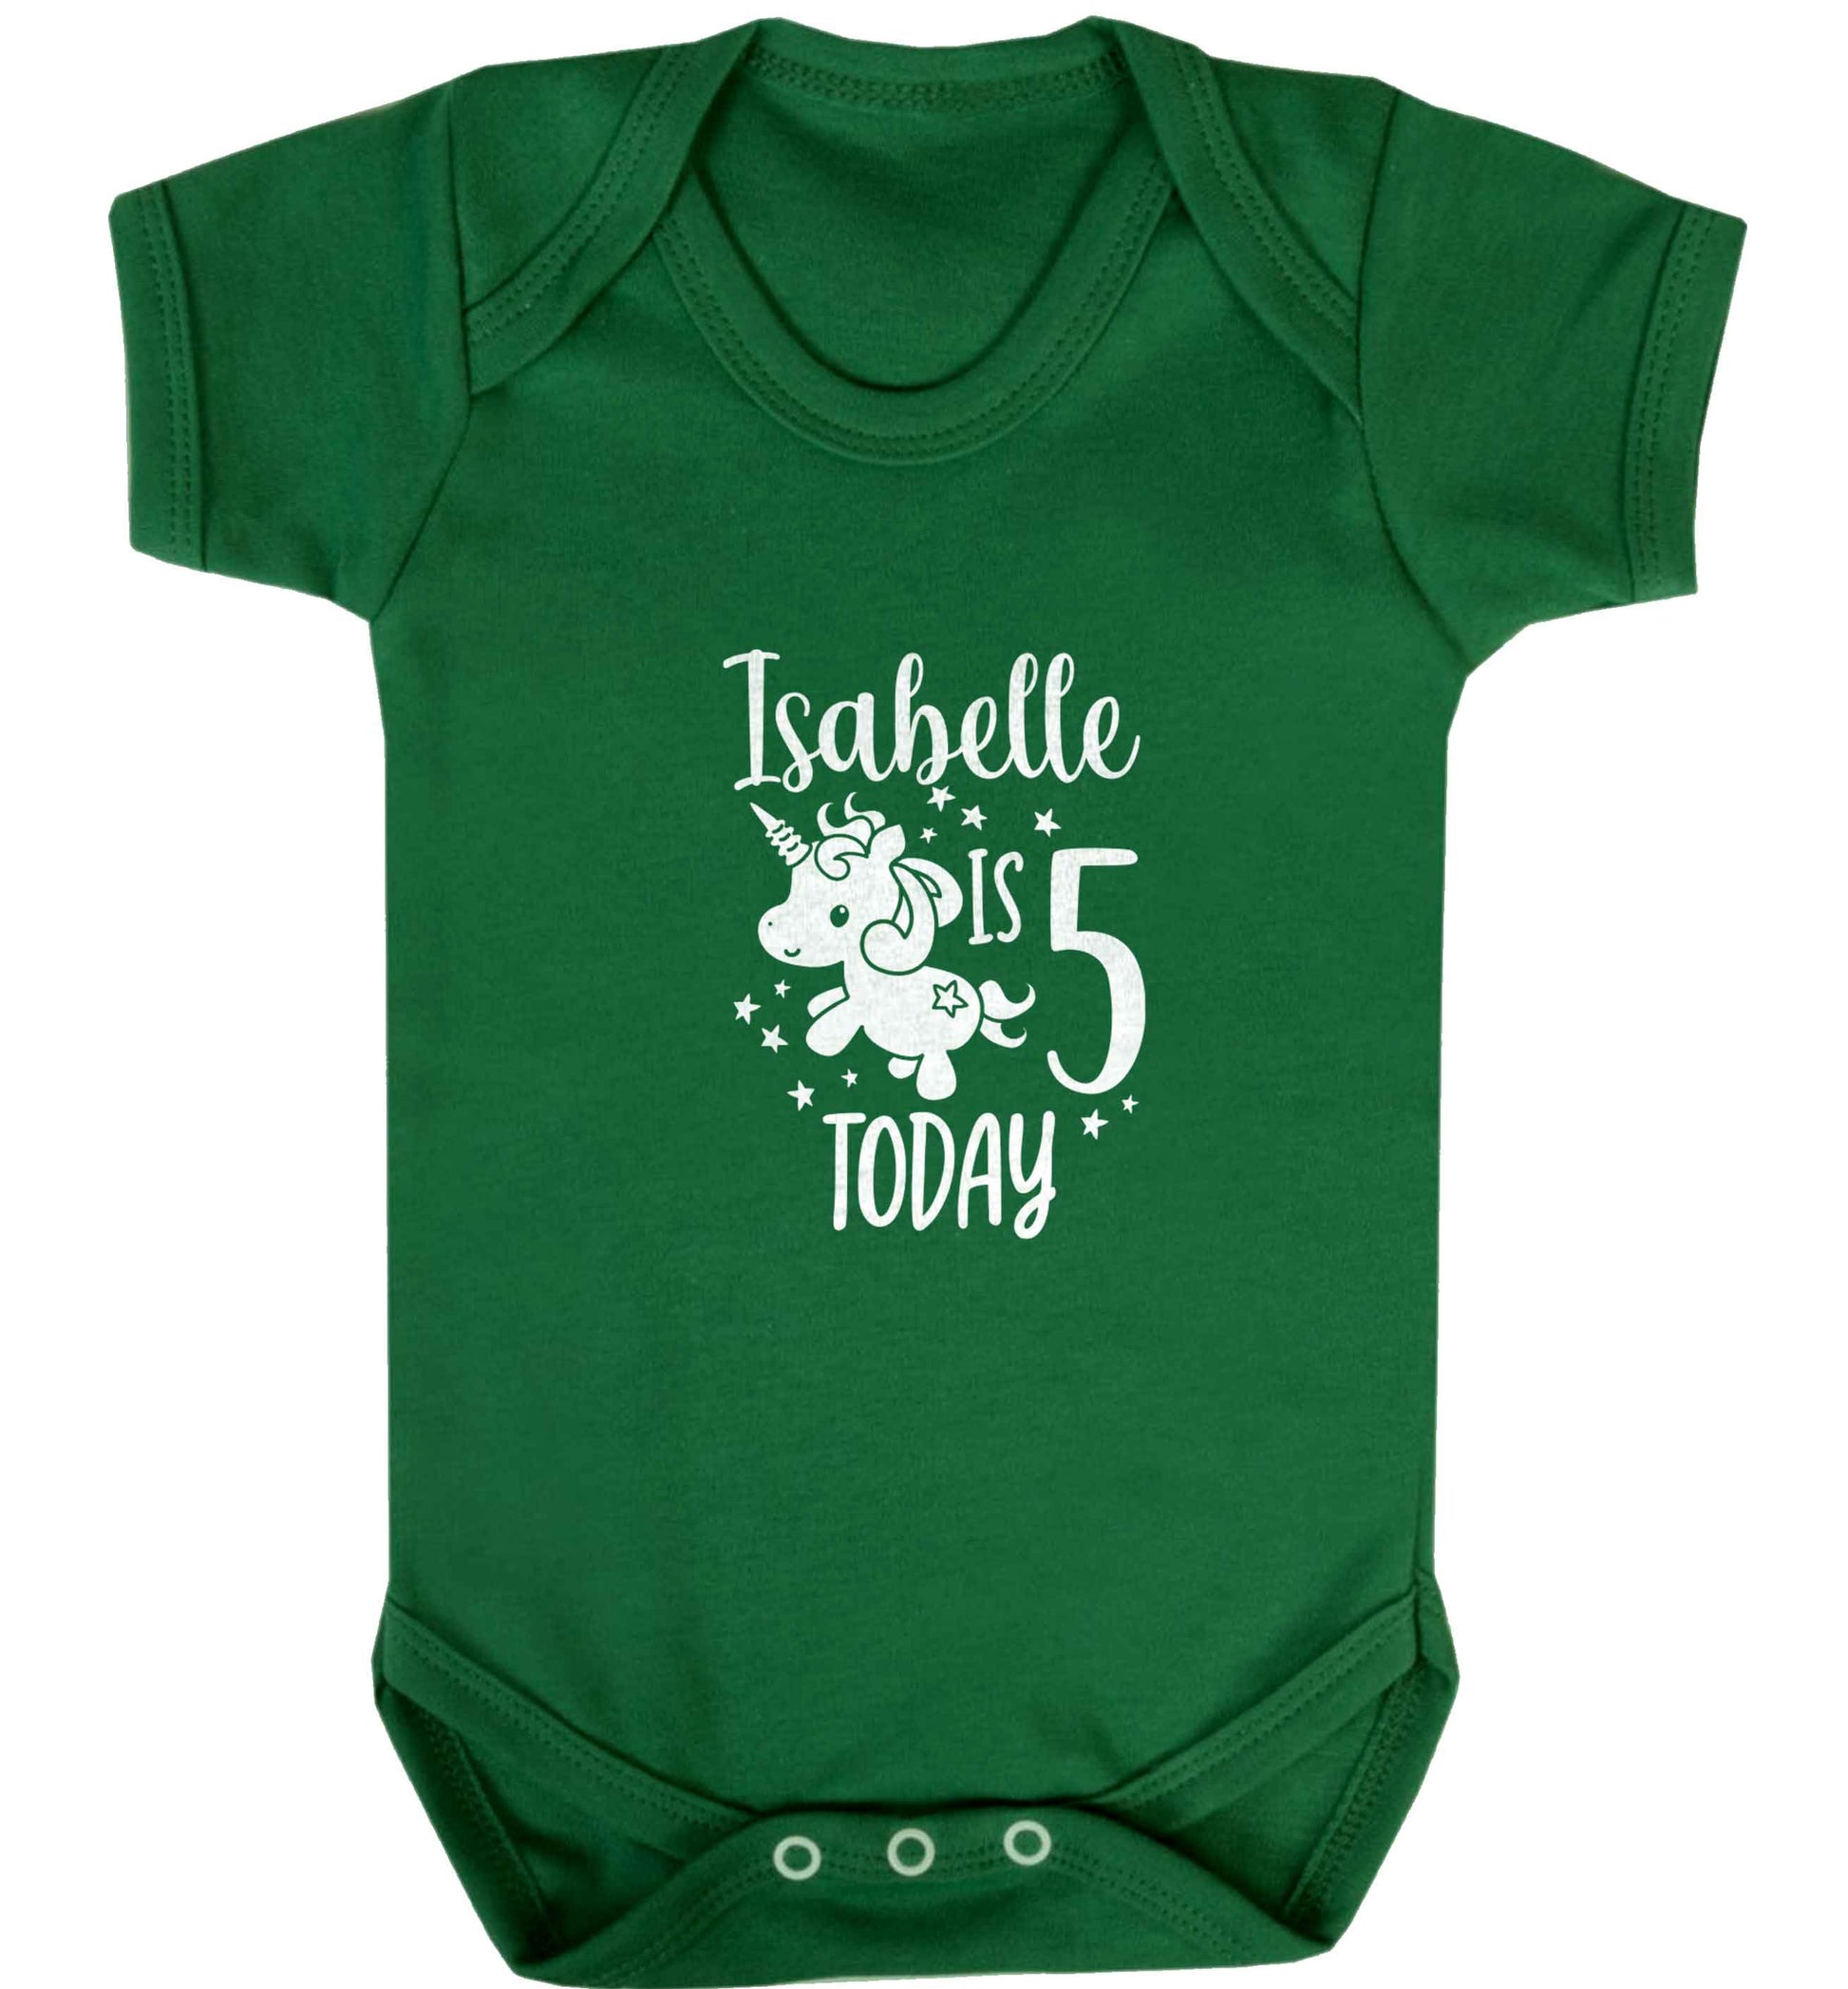 Today I am - Personalise with any name or age! Birthday unicorn baby vest green 18-24 months